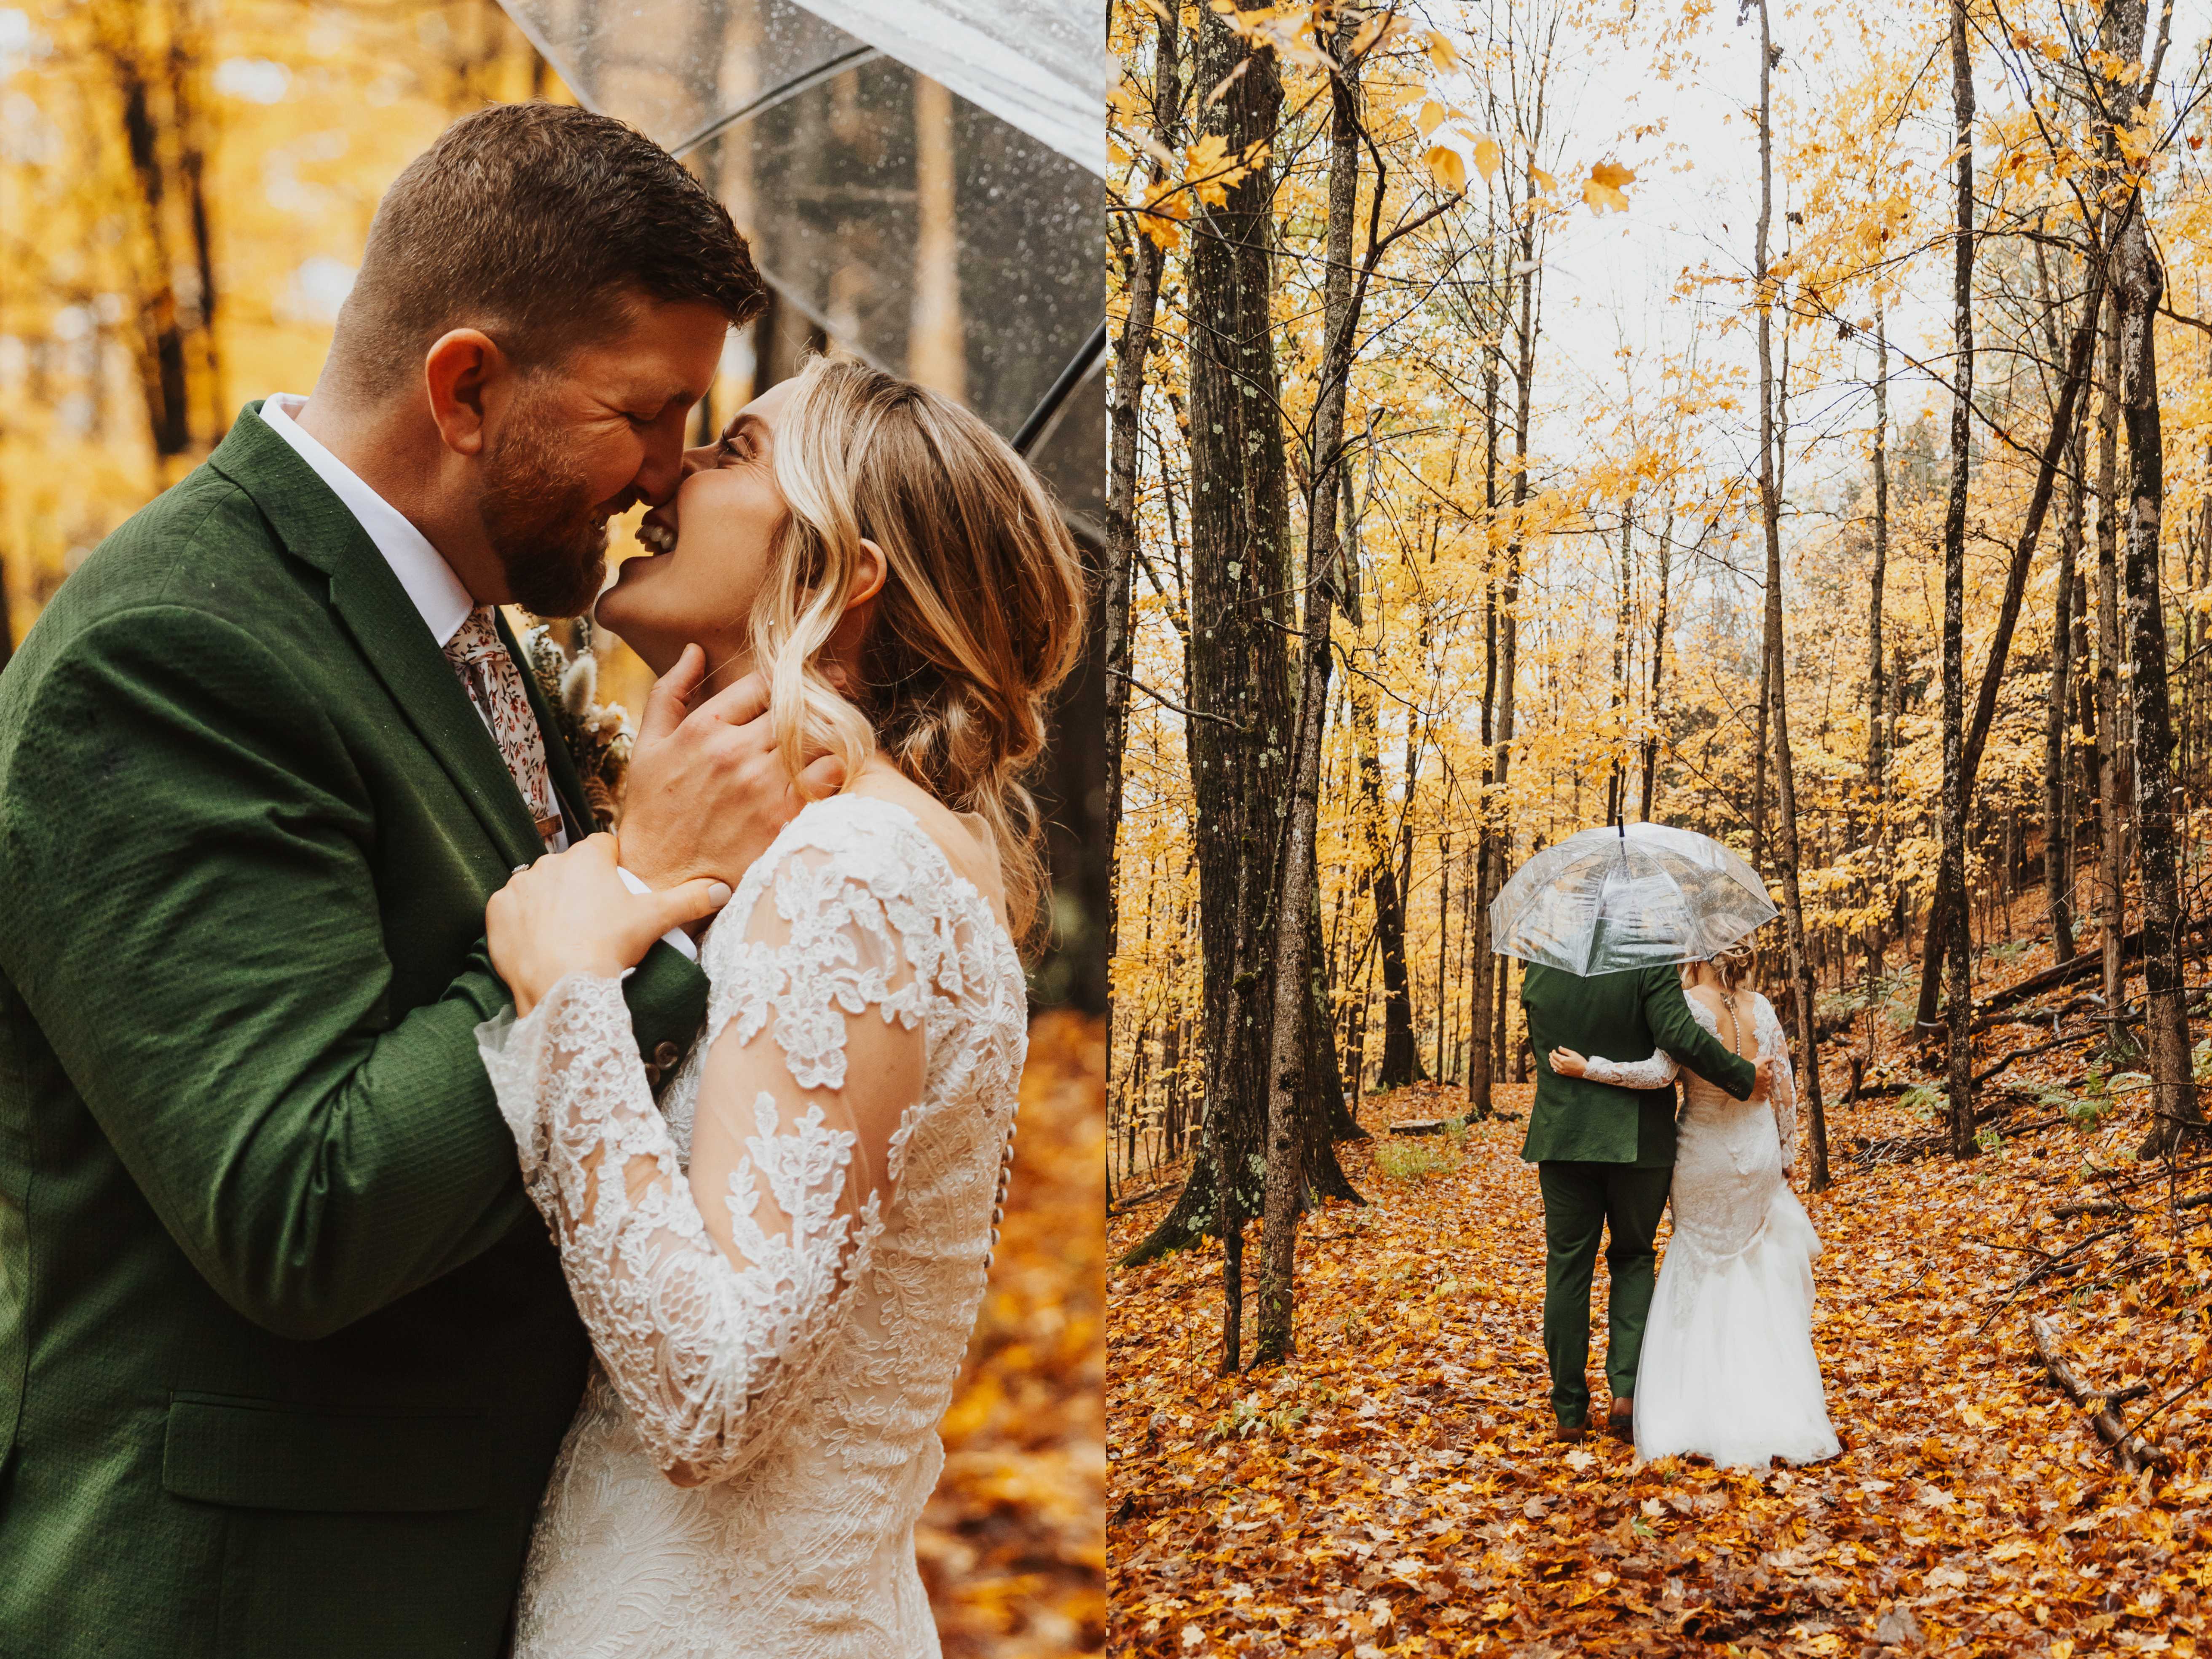 2 photos side by side of a bride and groom in a forest of yellow leaves, in the left photo they laugh as they're about to kiss, in the right they are walking away from the camera holding each other while under an umbrella